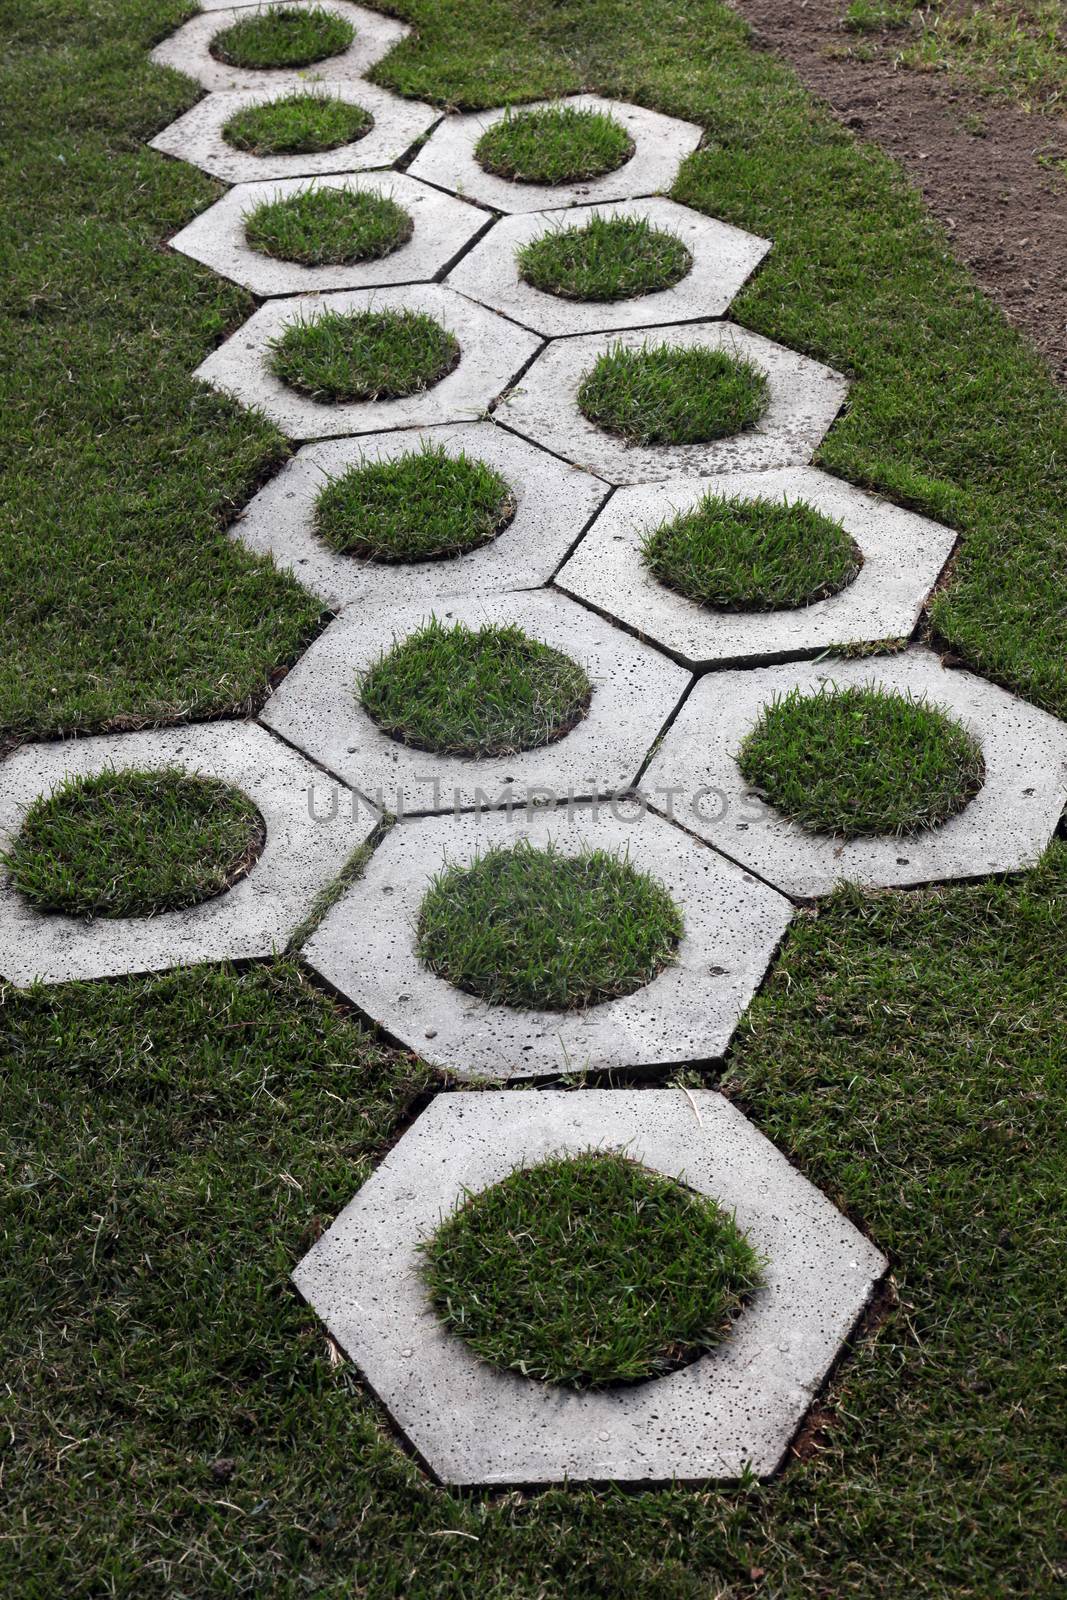 Walkway on the grass